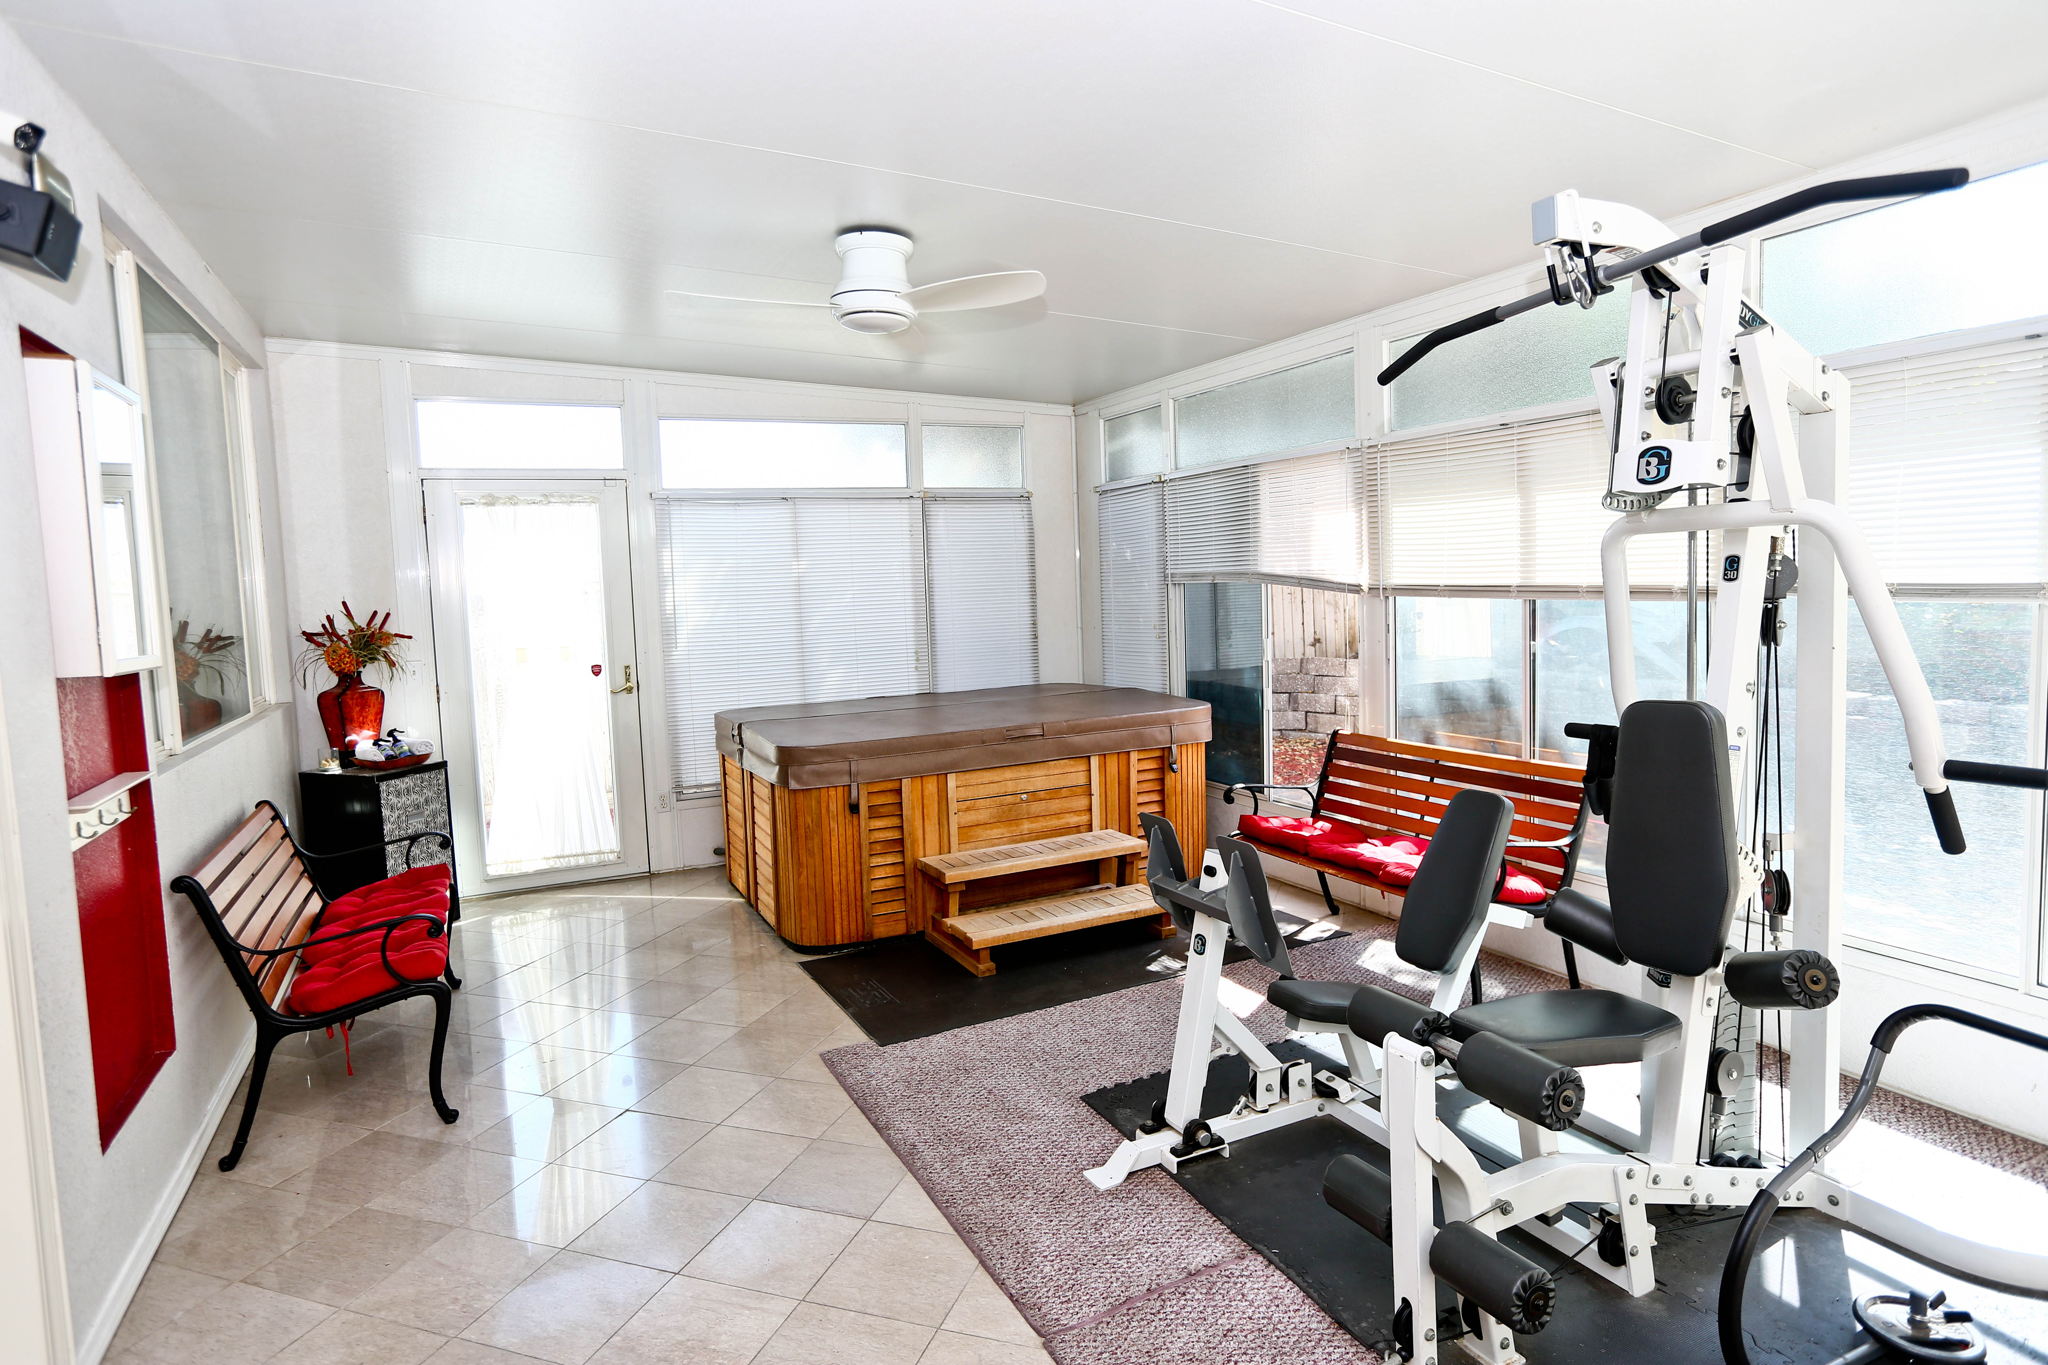 Hot tub and exercise equipment conveys